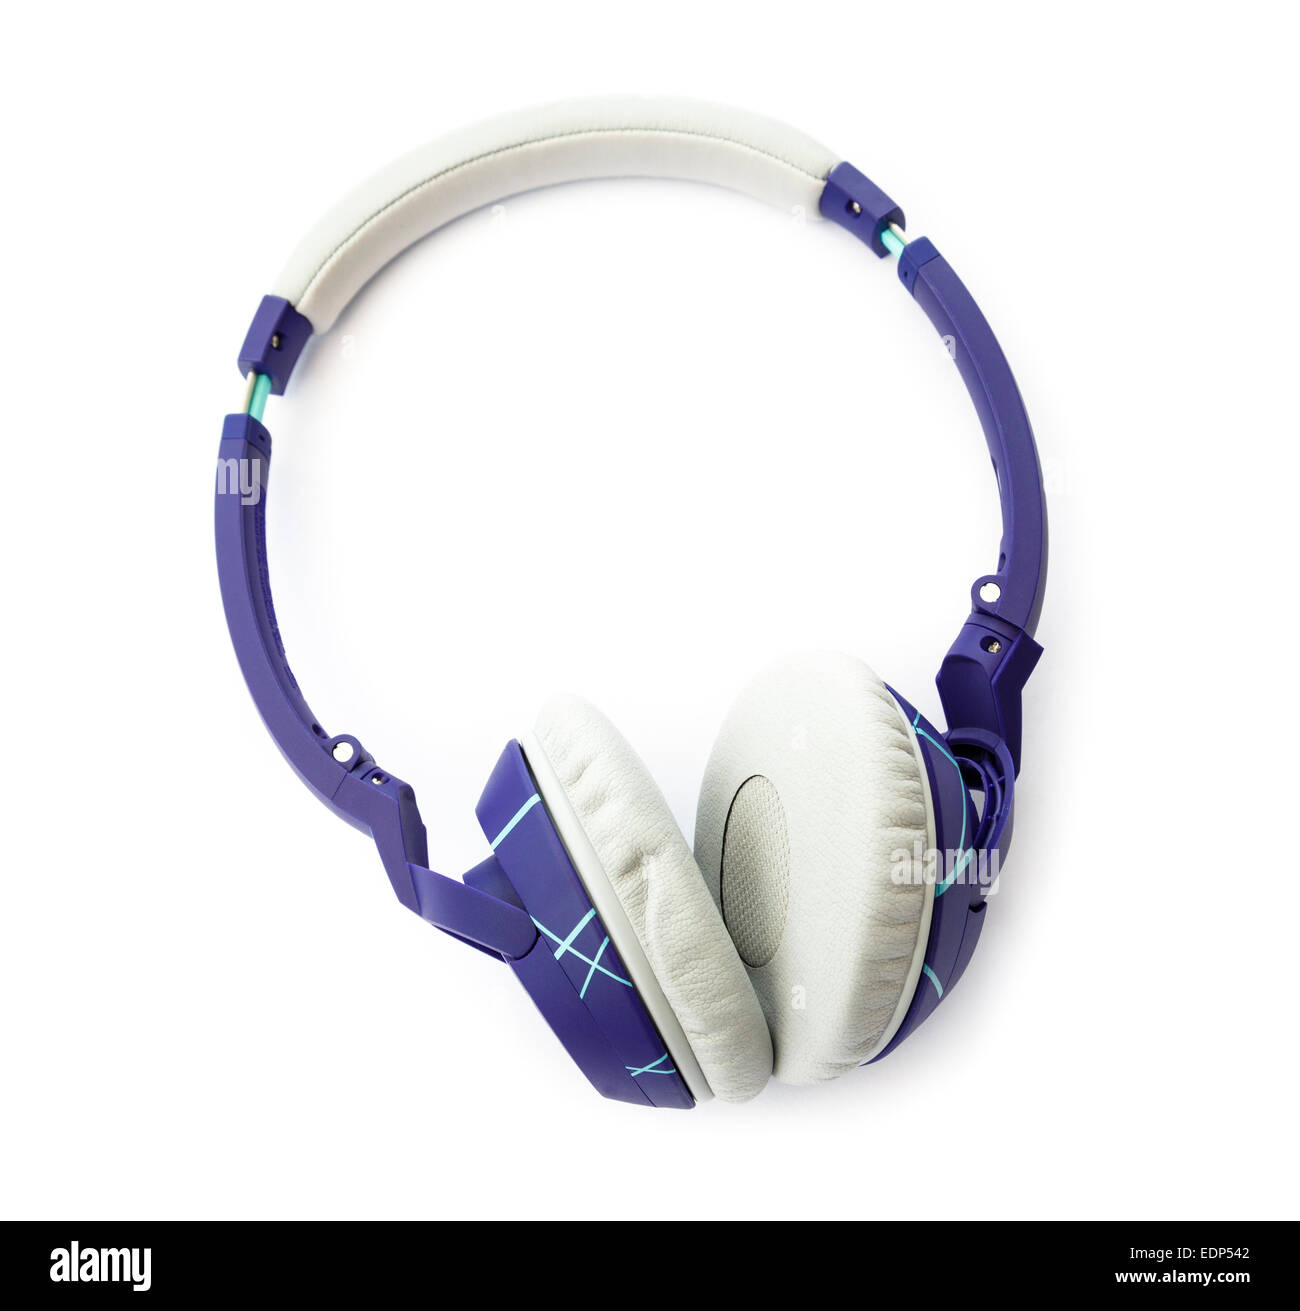 Set of Bose SoundTrue on-ear Headphones with padded speakers and headband for listening to music isolated on a white background Stock Photo